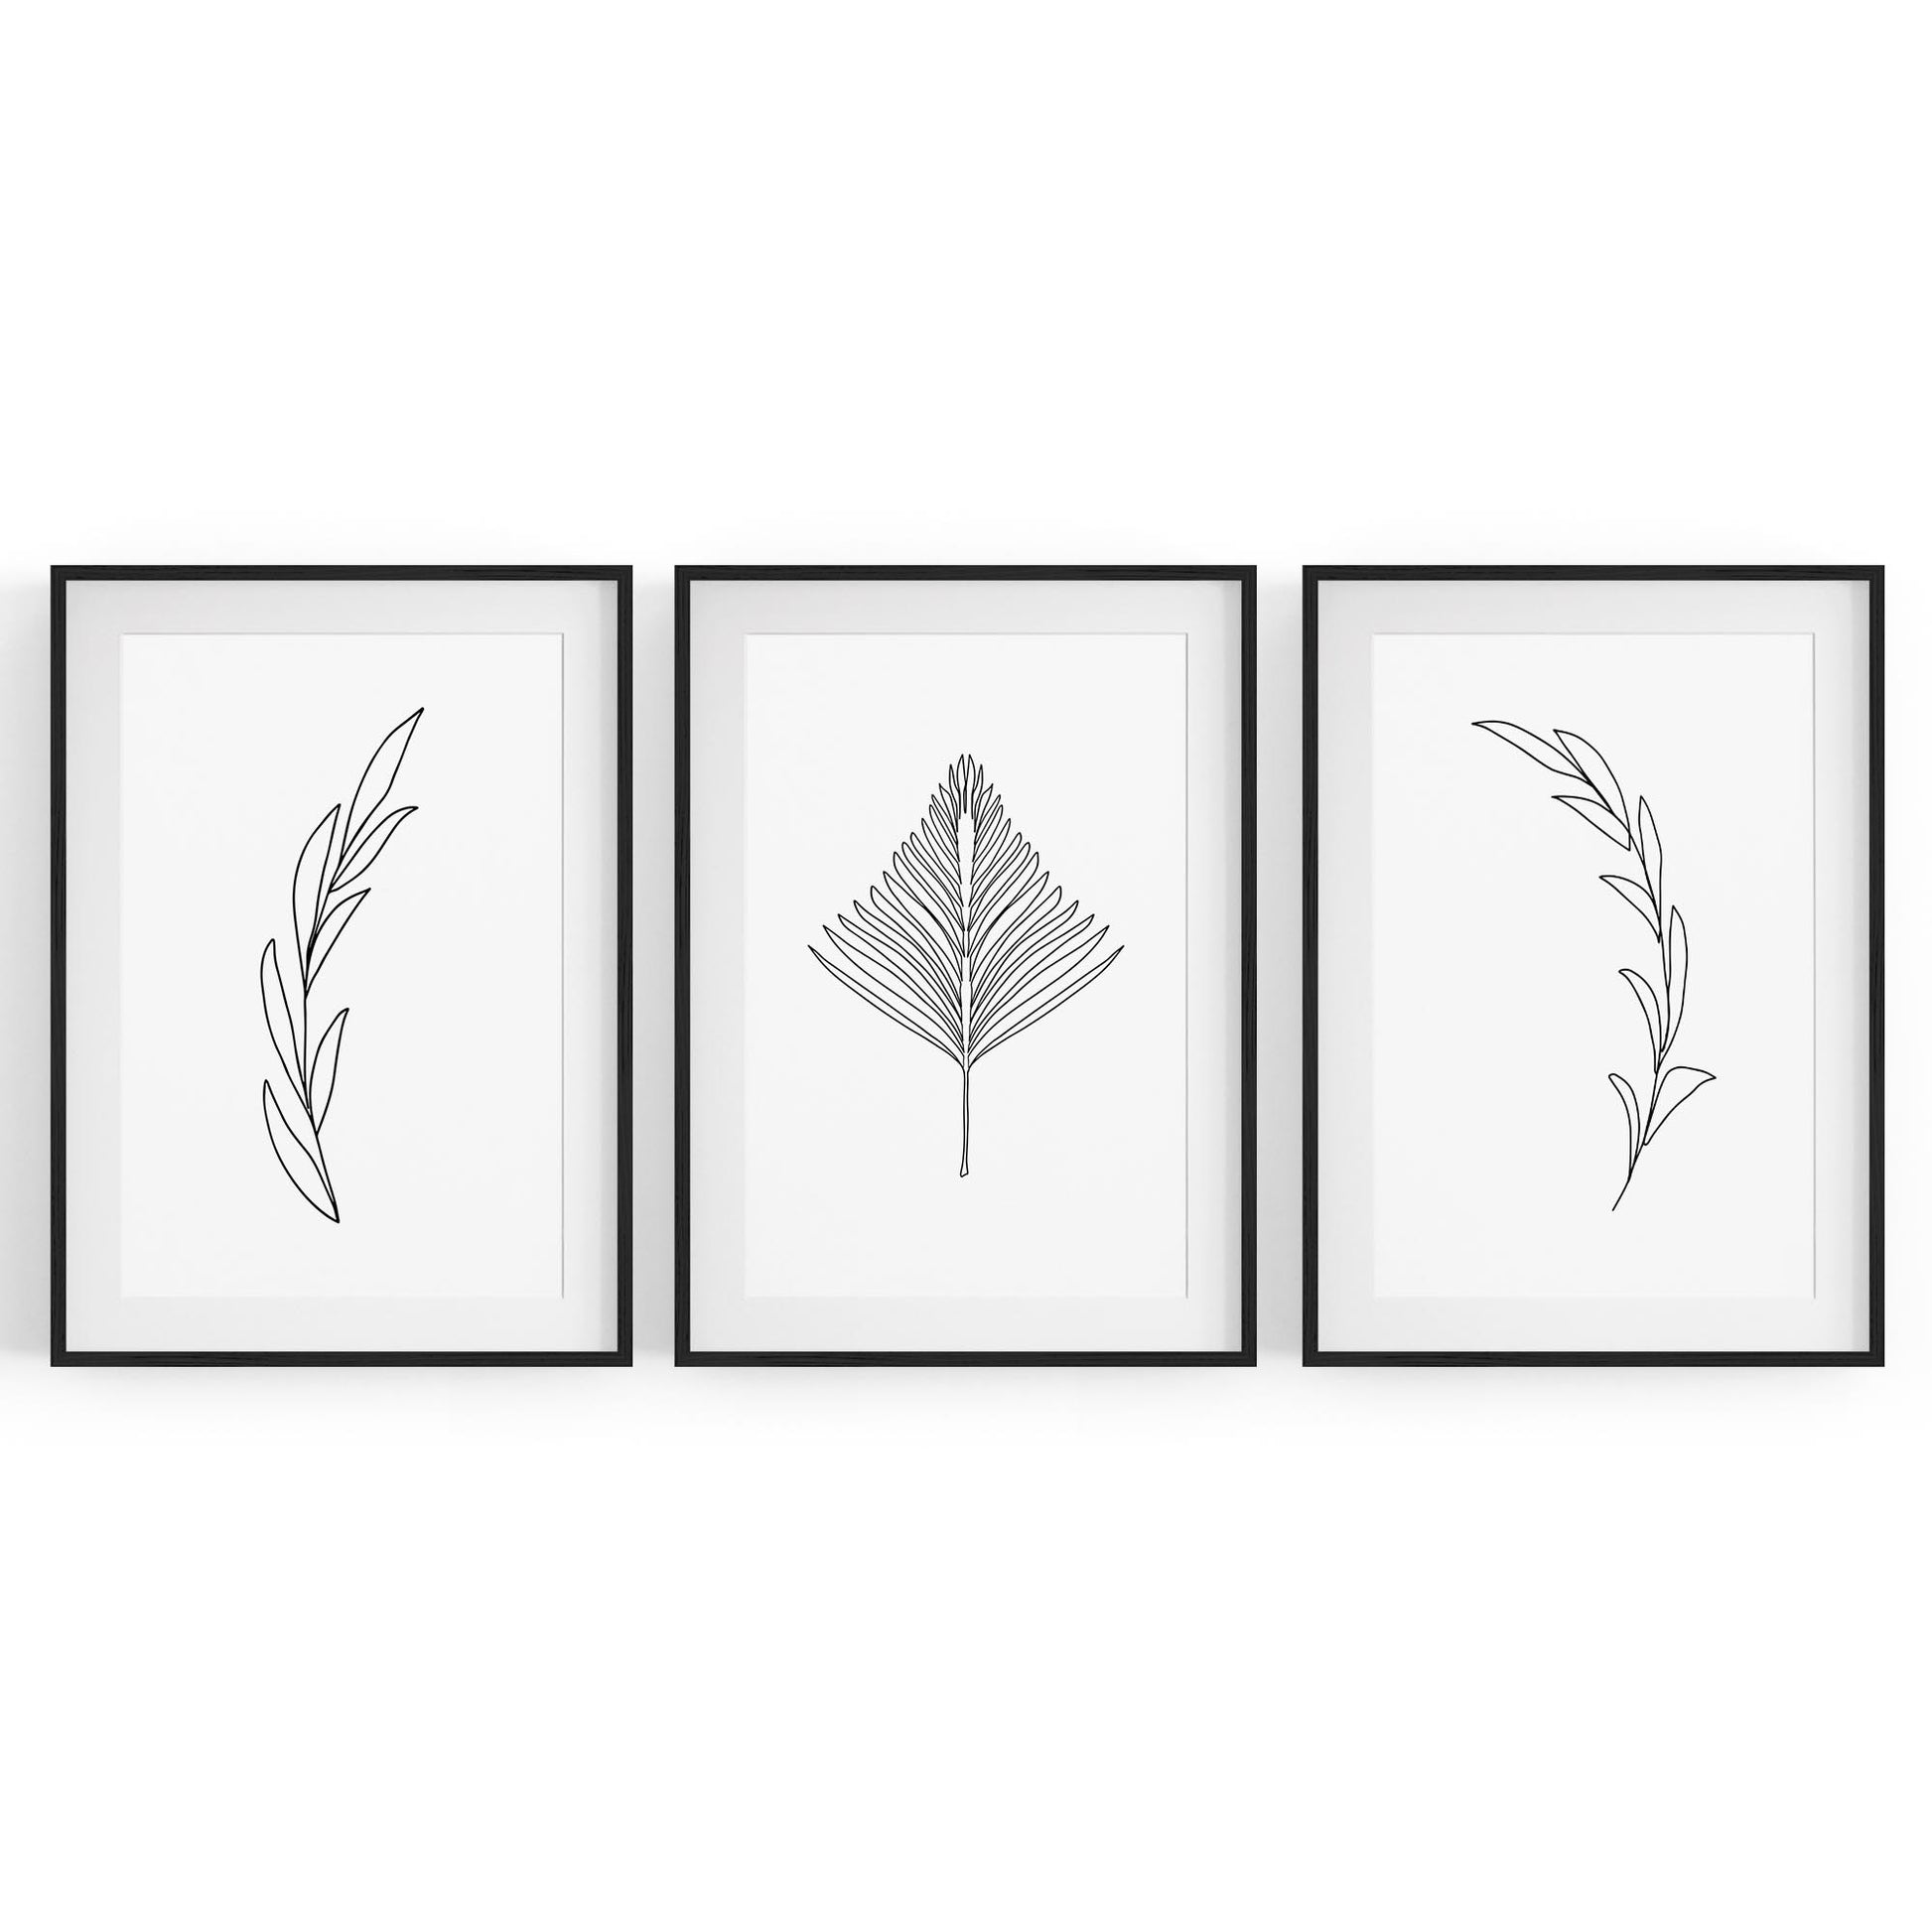 Set of Minimal Plant Line Drawings Wall Art #1 - The Affordable Art Company